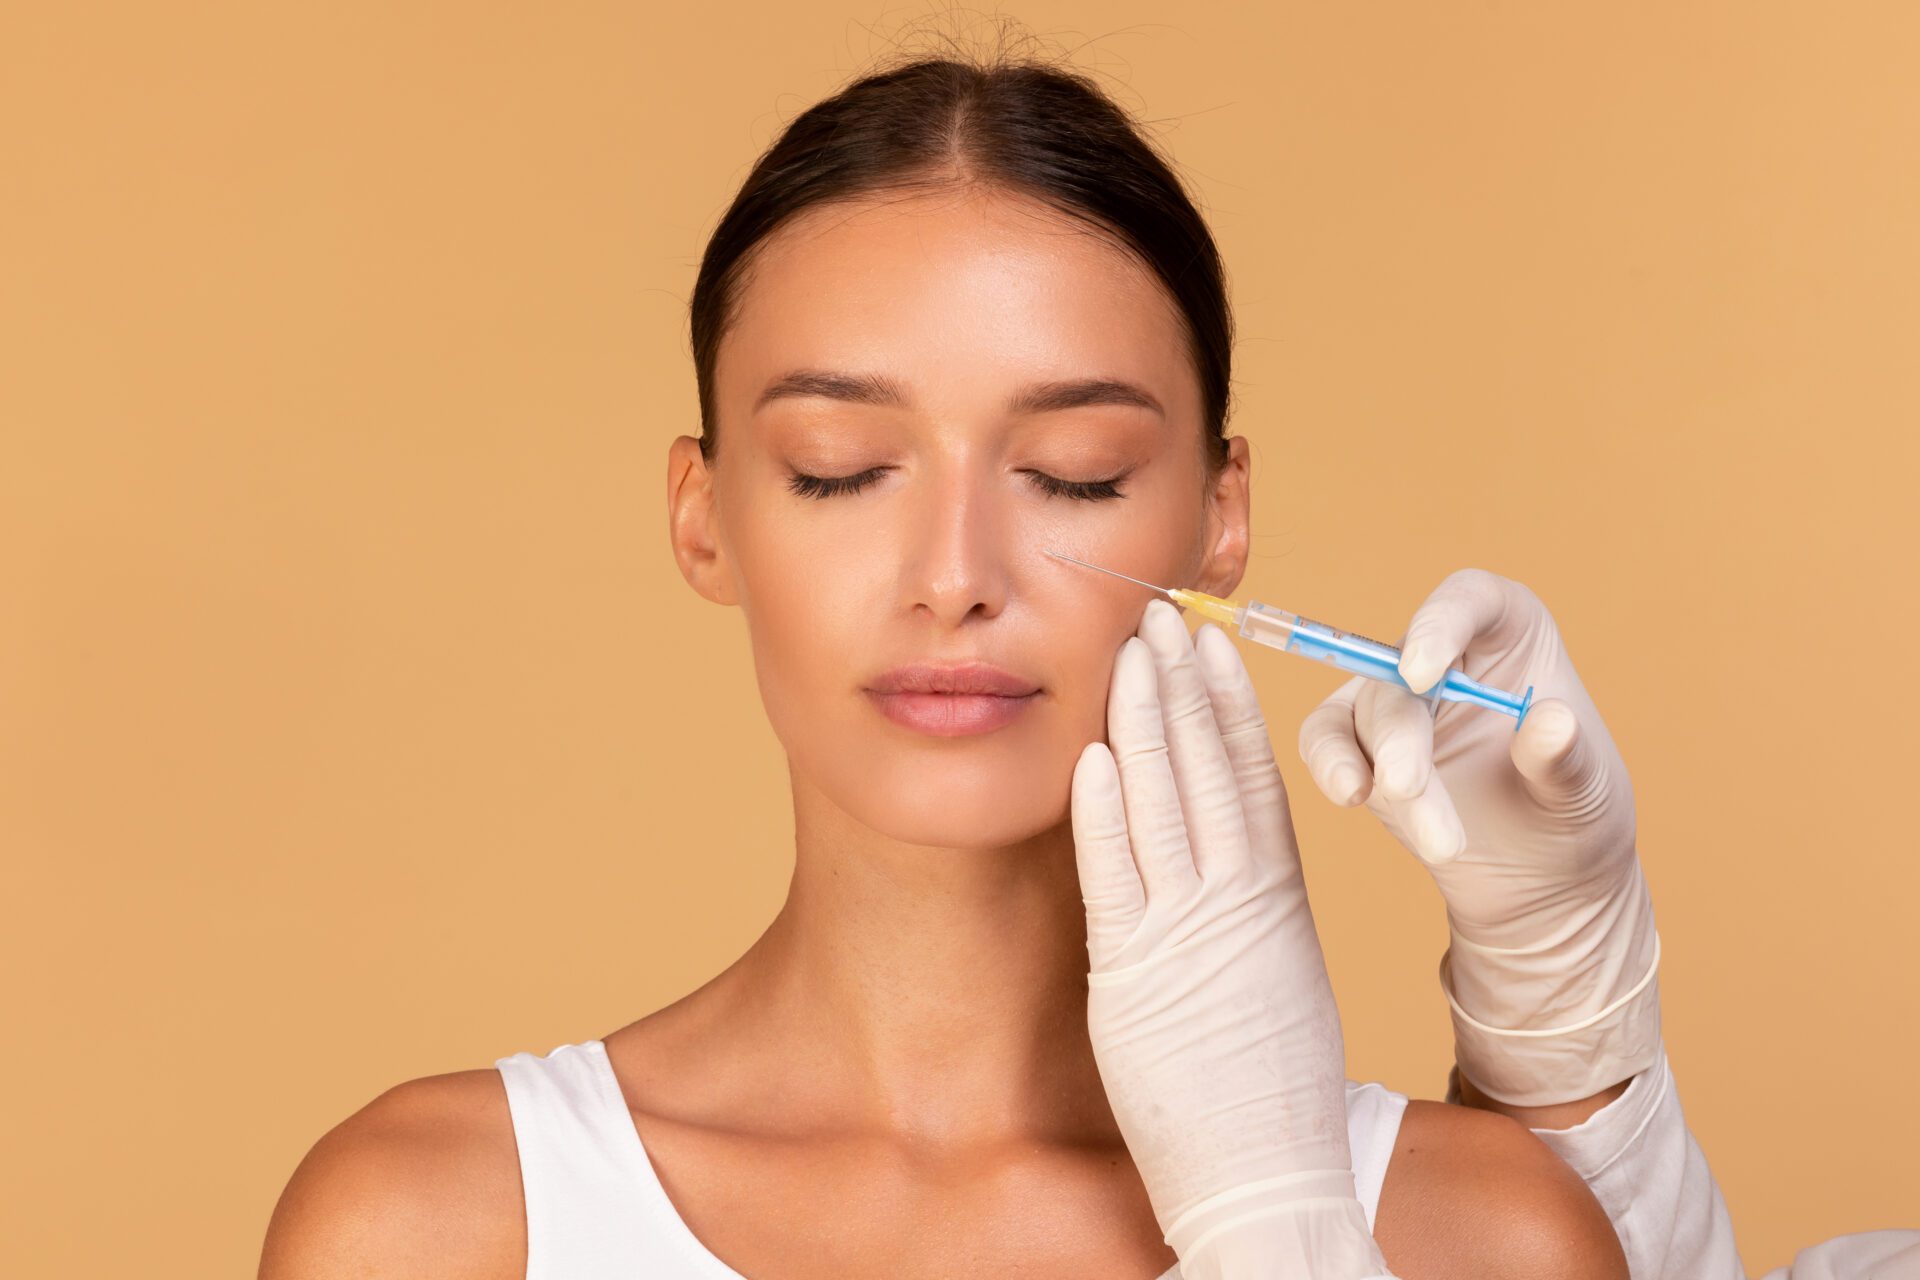 Volume Fillers | Dermal Filler Injections for lips, smile lines, cheeks, and jawline